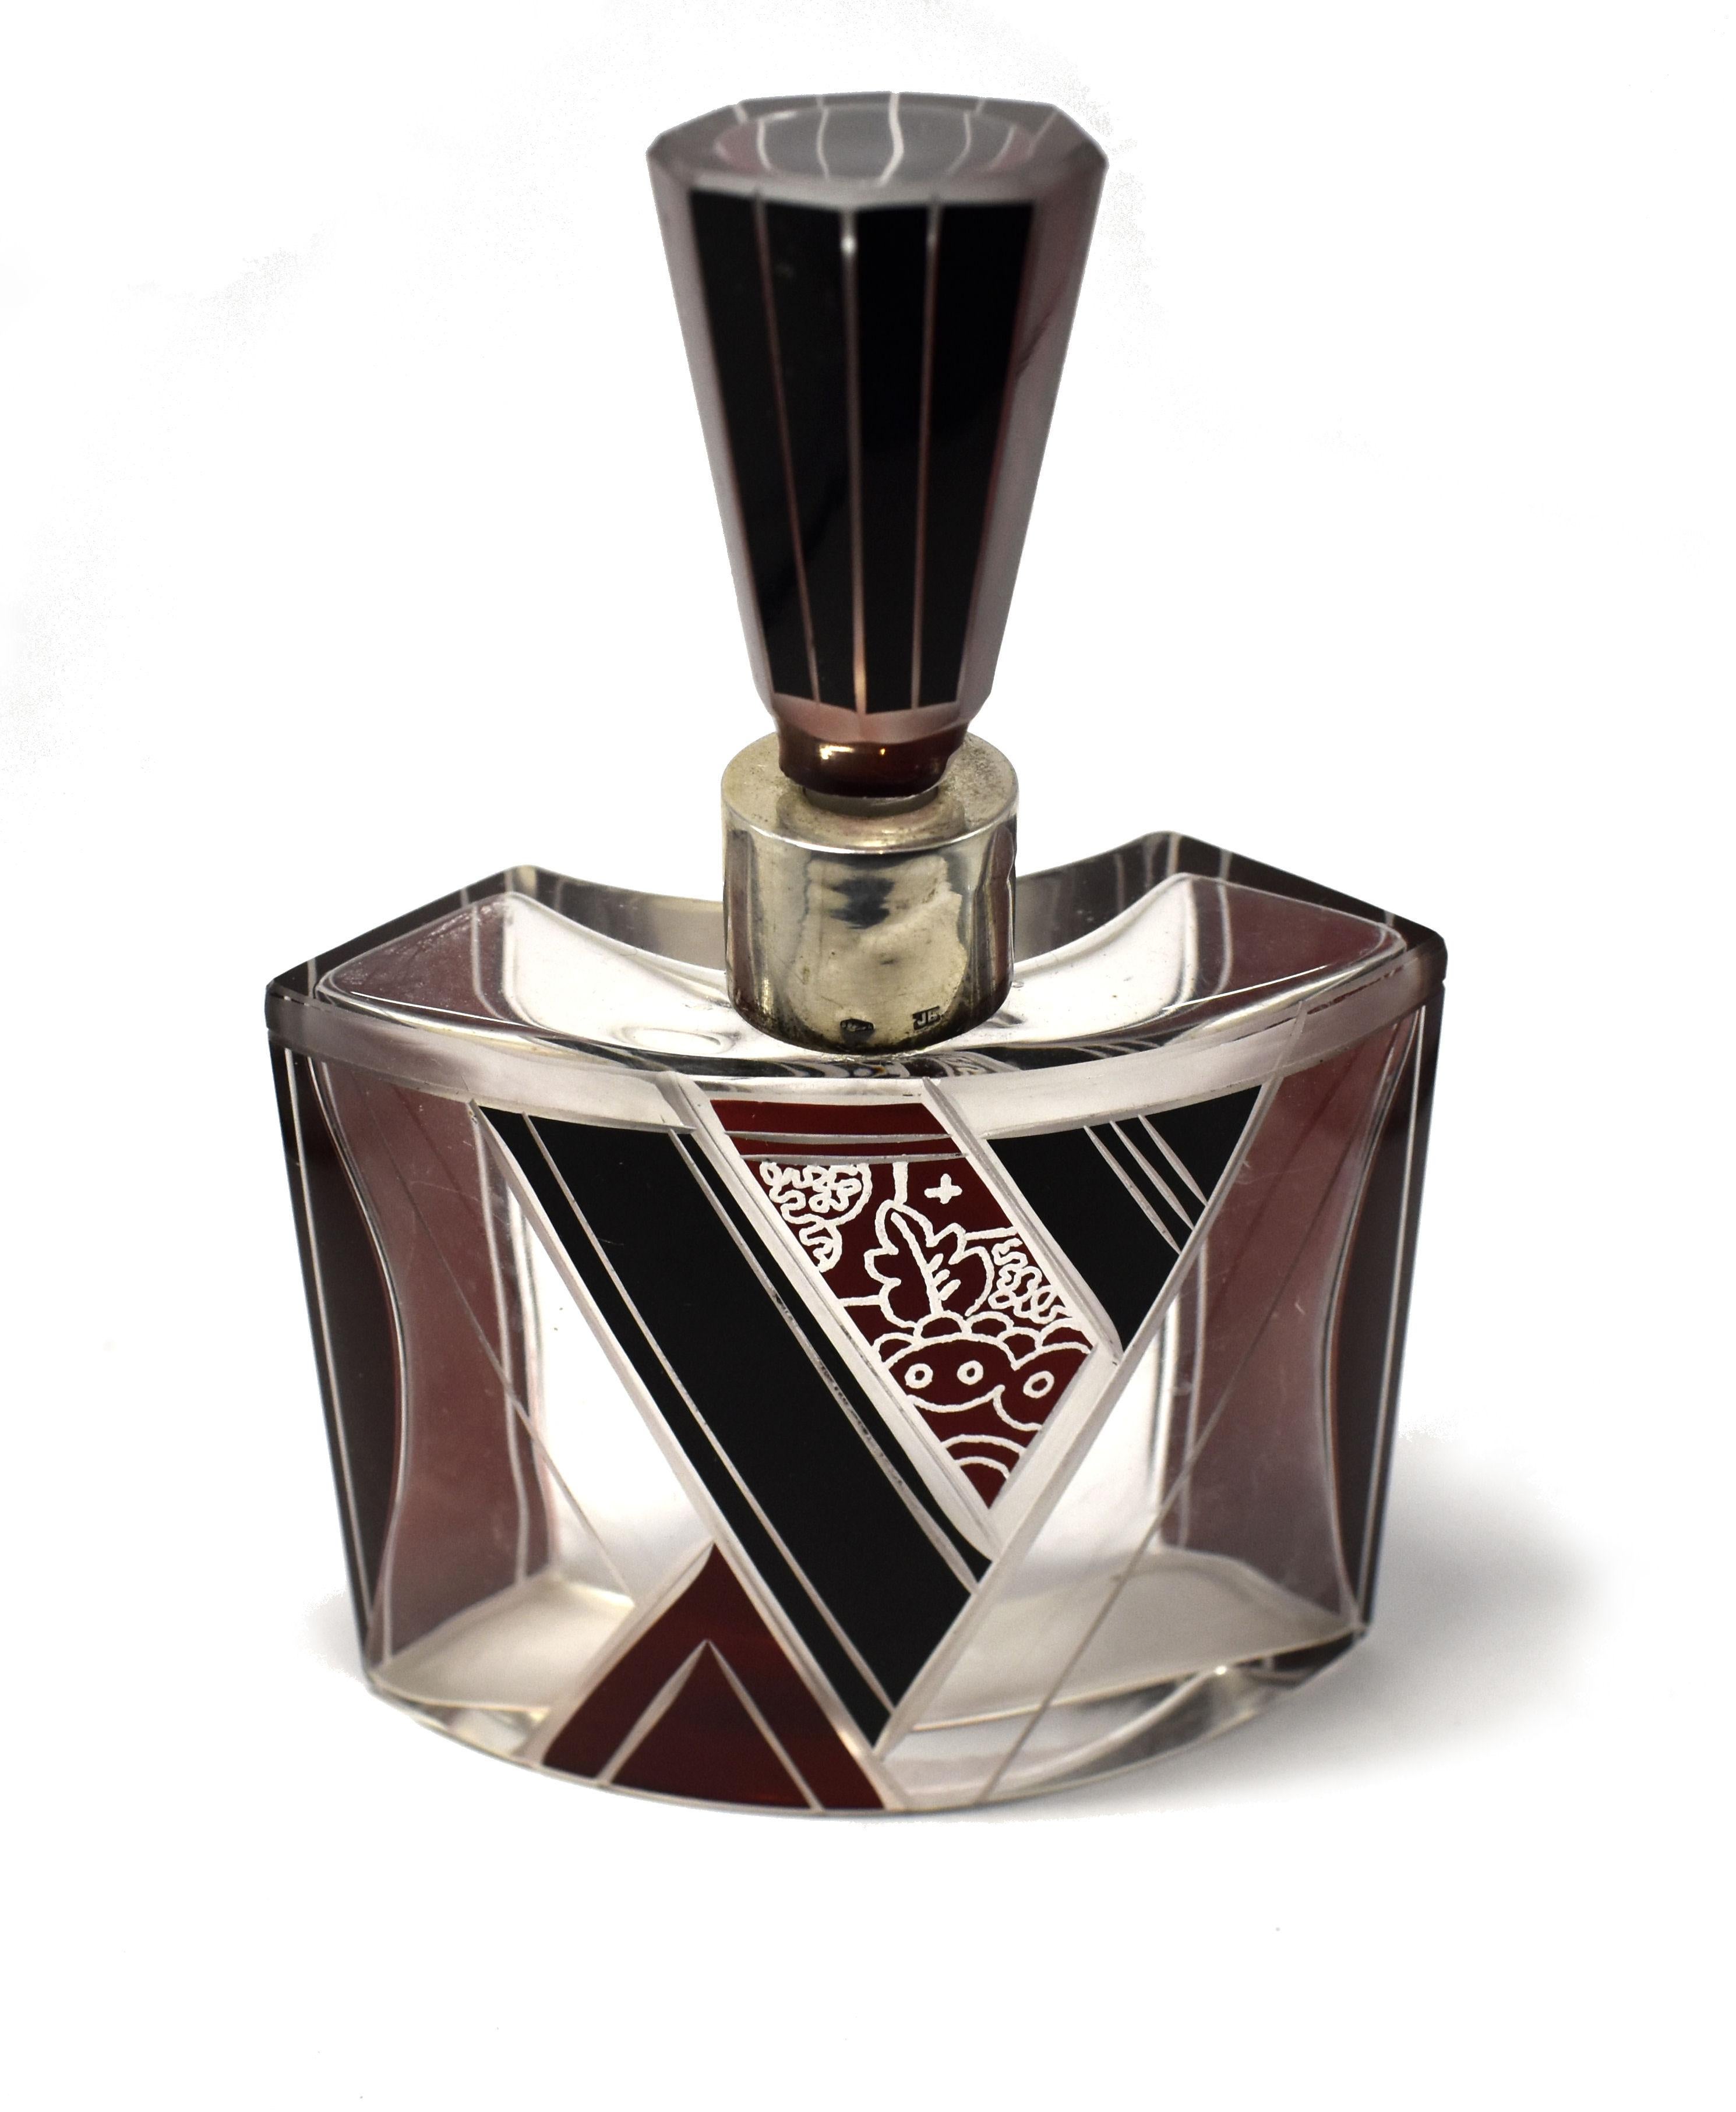 This perfume bottle is an absolute delight in every aspect. From the unusual crescent shaped body with it's deep red and jet black enamel decoration. To the acid etched detailing to the conical glass stopper and lastly to the silver collar neck to